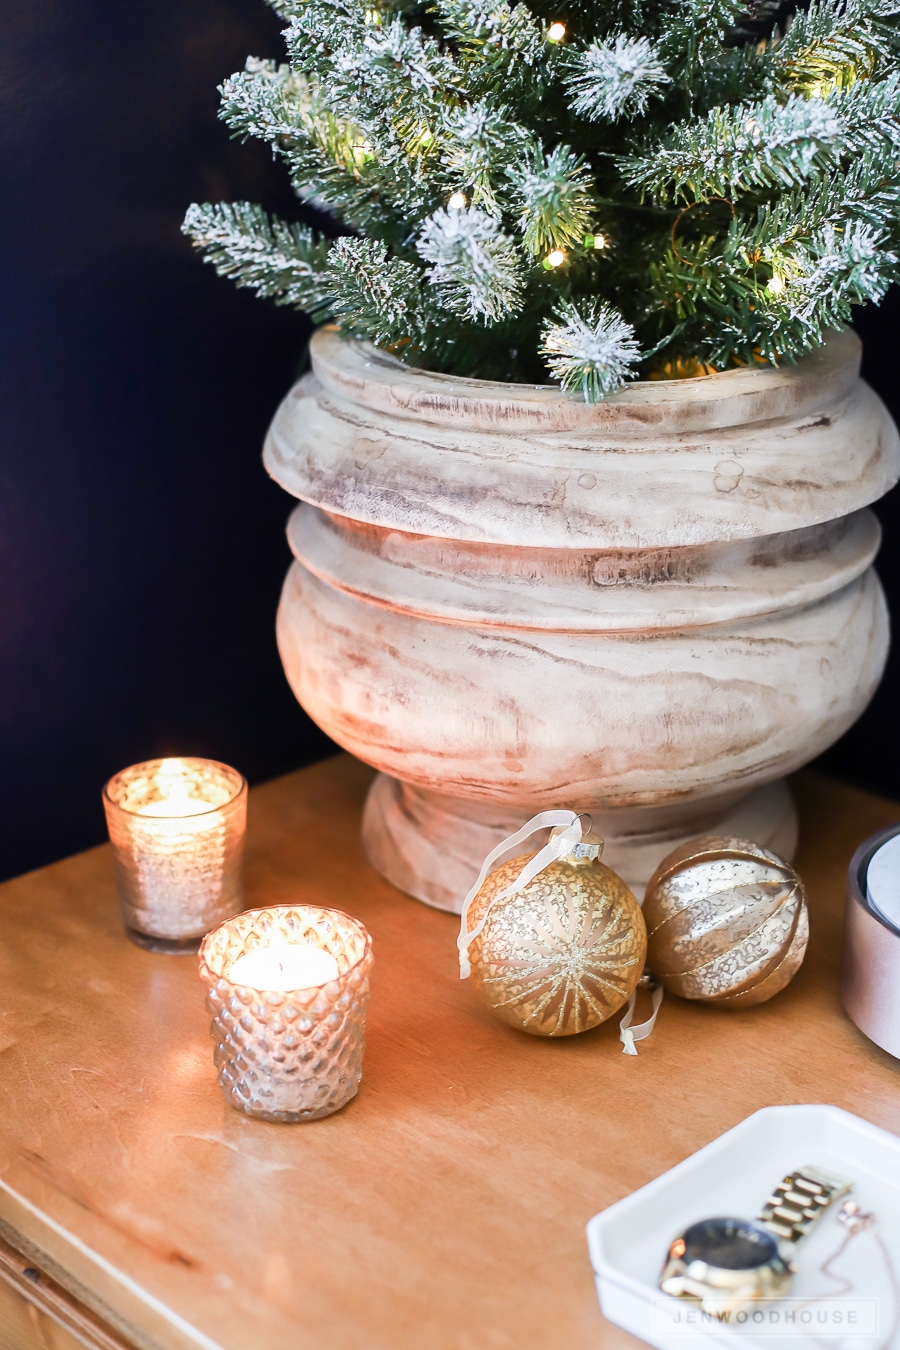 How to style your nightstand for the holidays